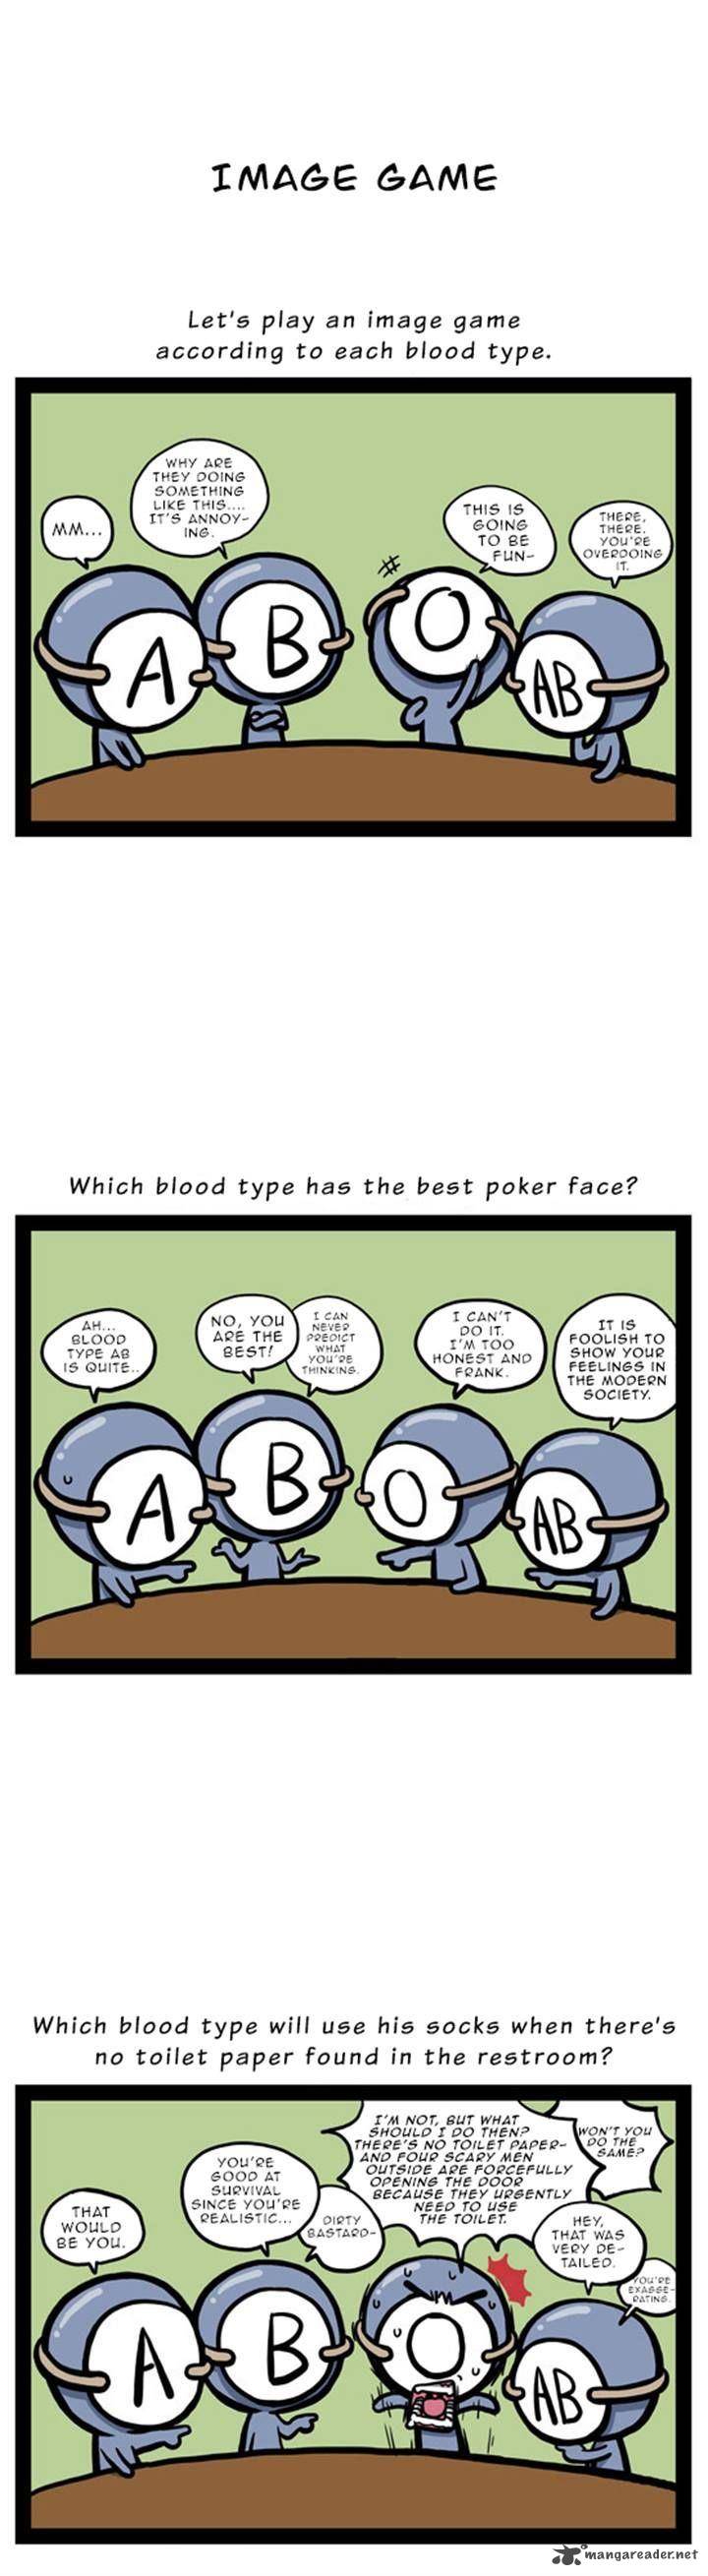 a_simple_thinking_about_blood_types_15_2